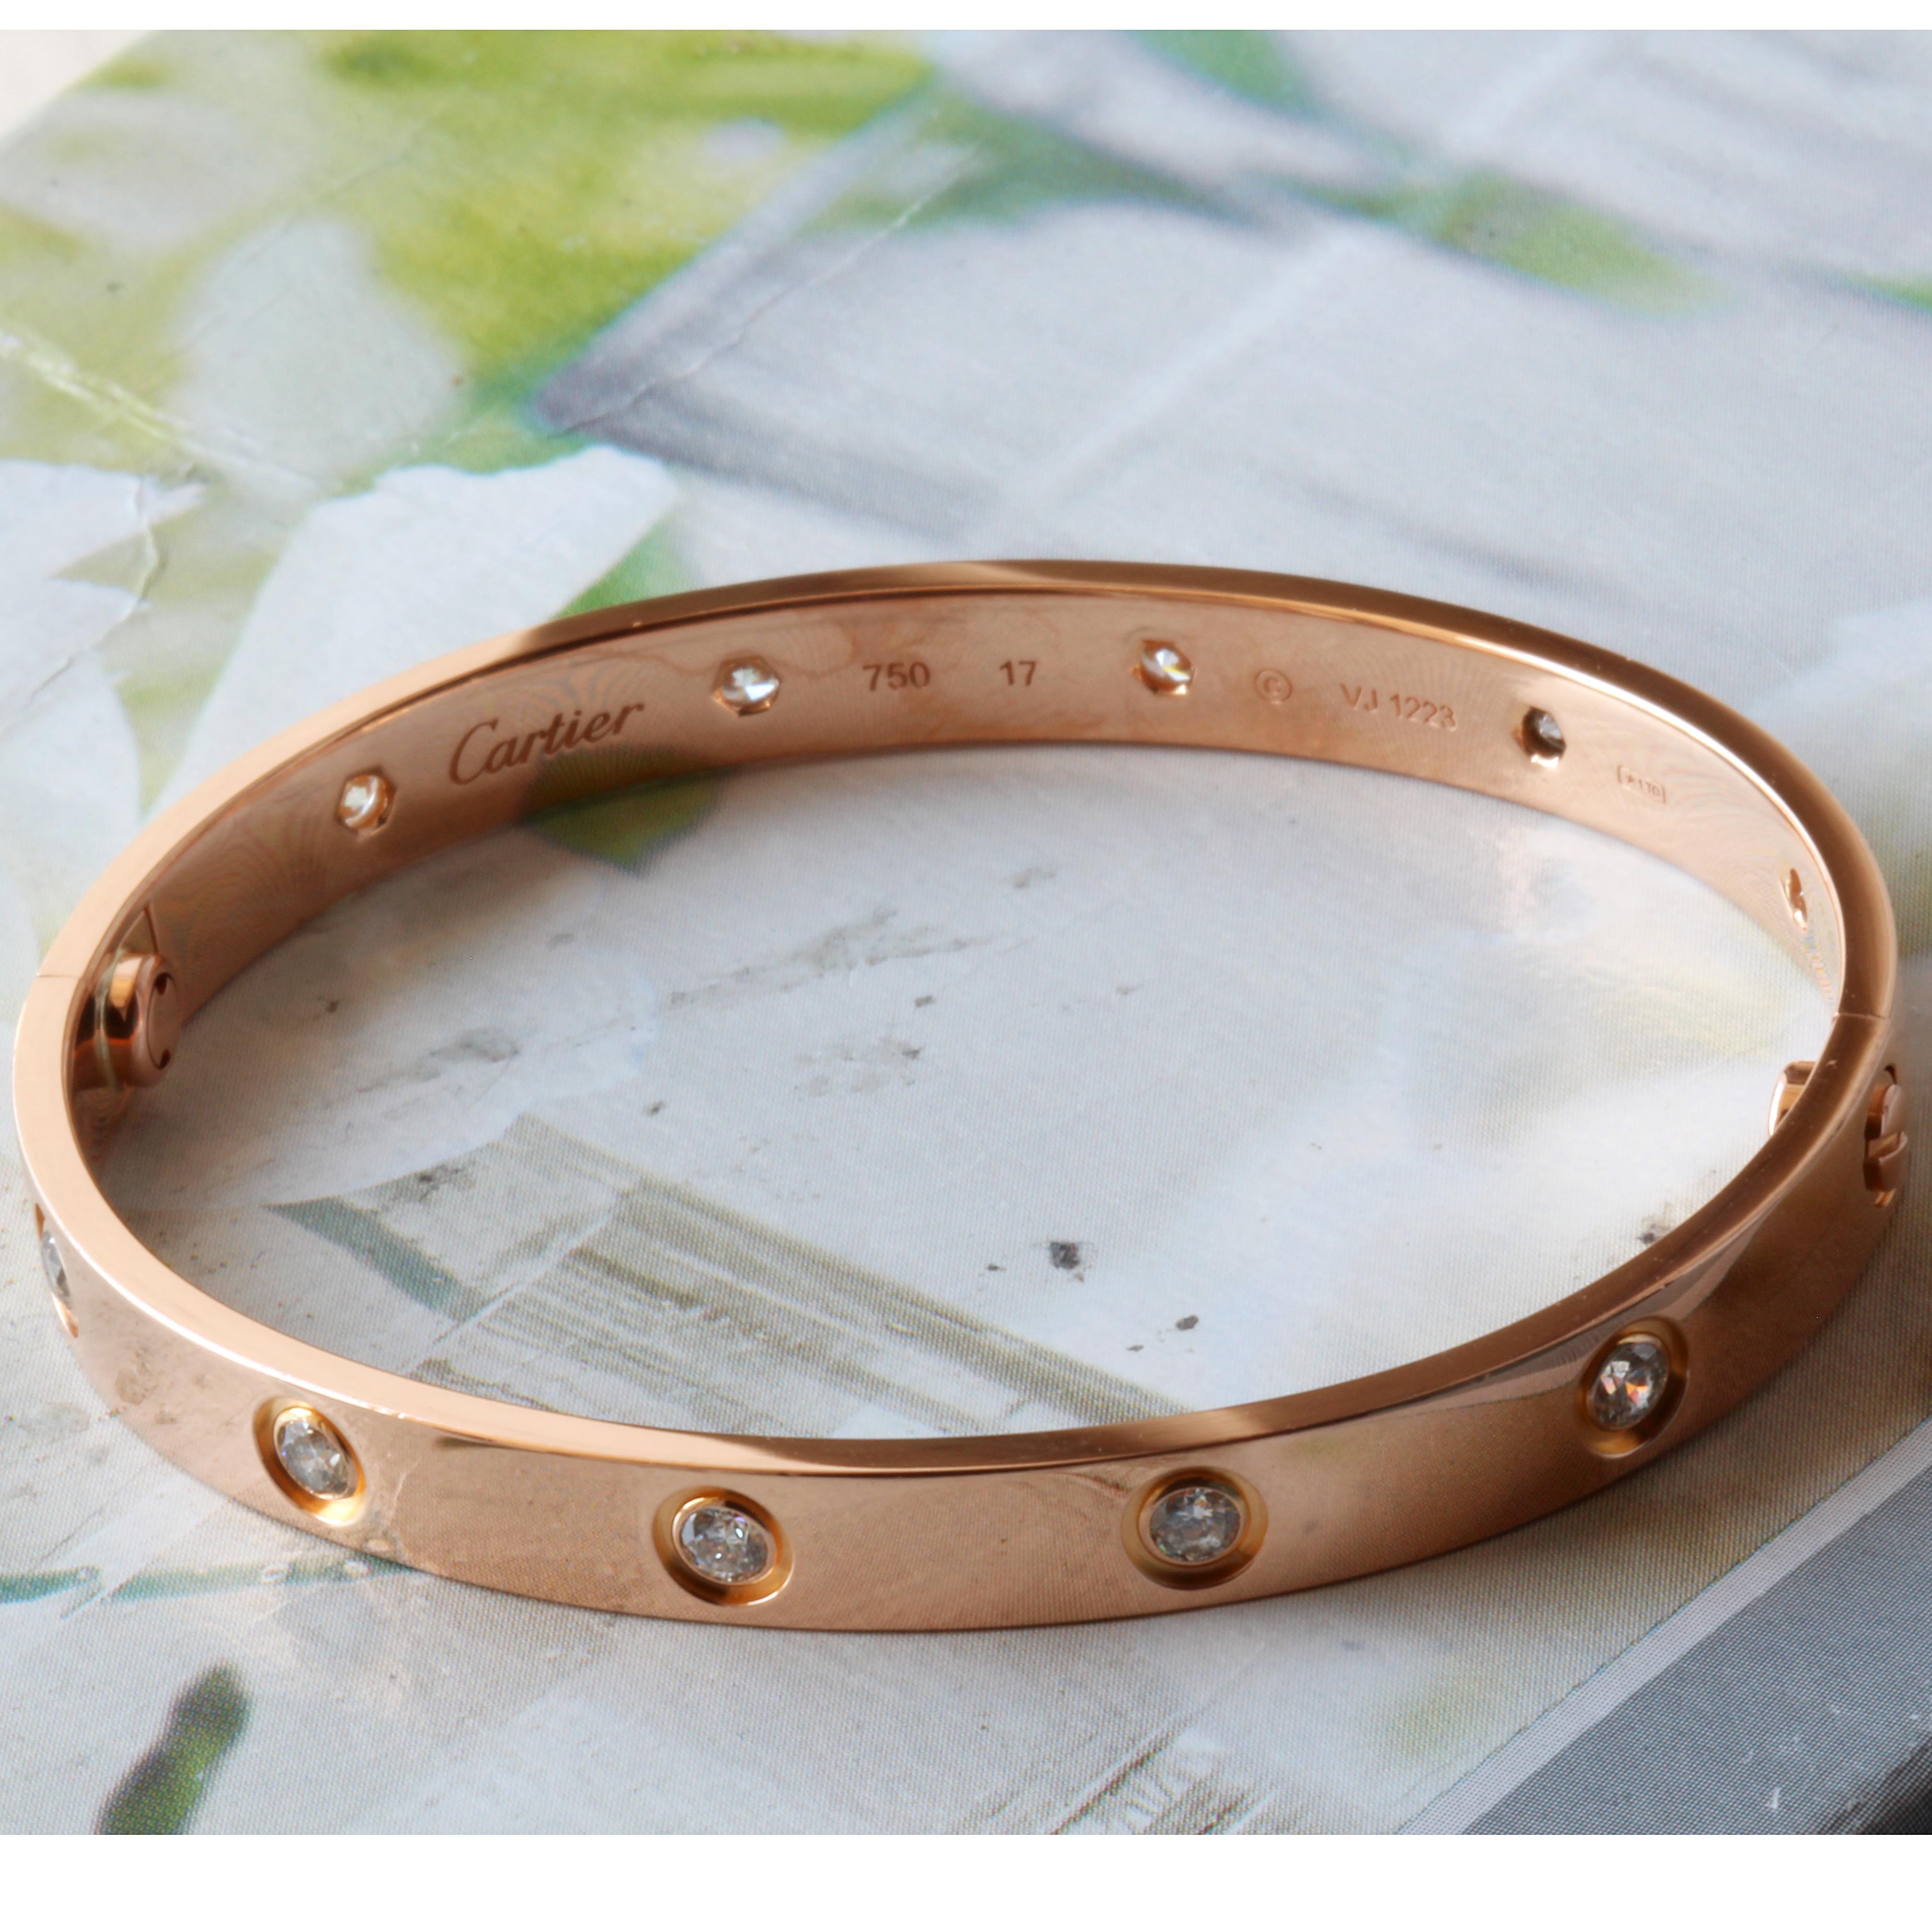 Cartier Love Bracelet Rose Gold With 10 Diamonds Size 17 

New Screw System So the screw cannot fall out.

This Bracelet is in Mint condition.

Comes With Box and Screw Driver

Guaranteed Authentic Cartier
